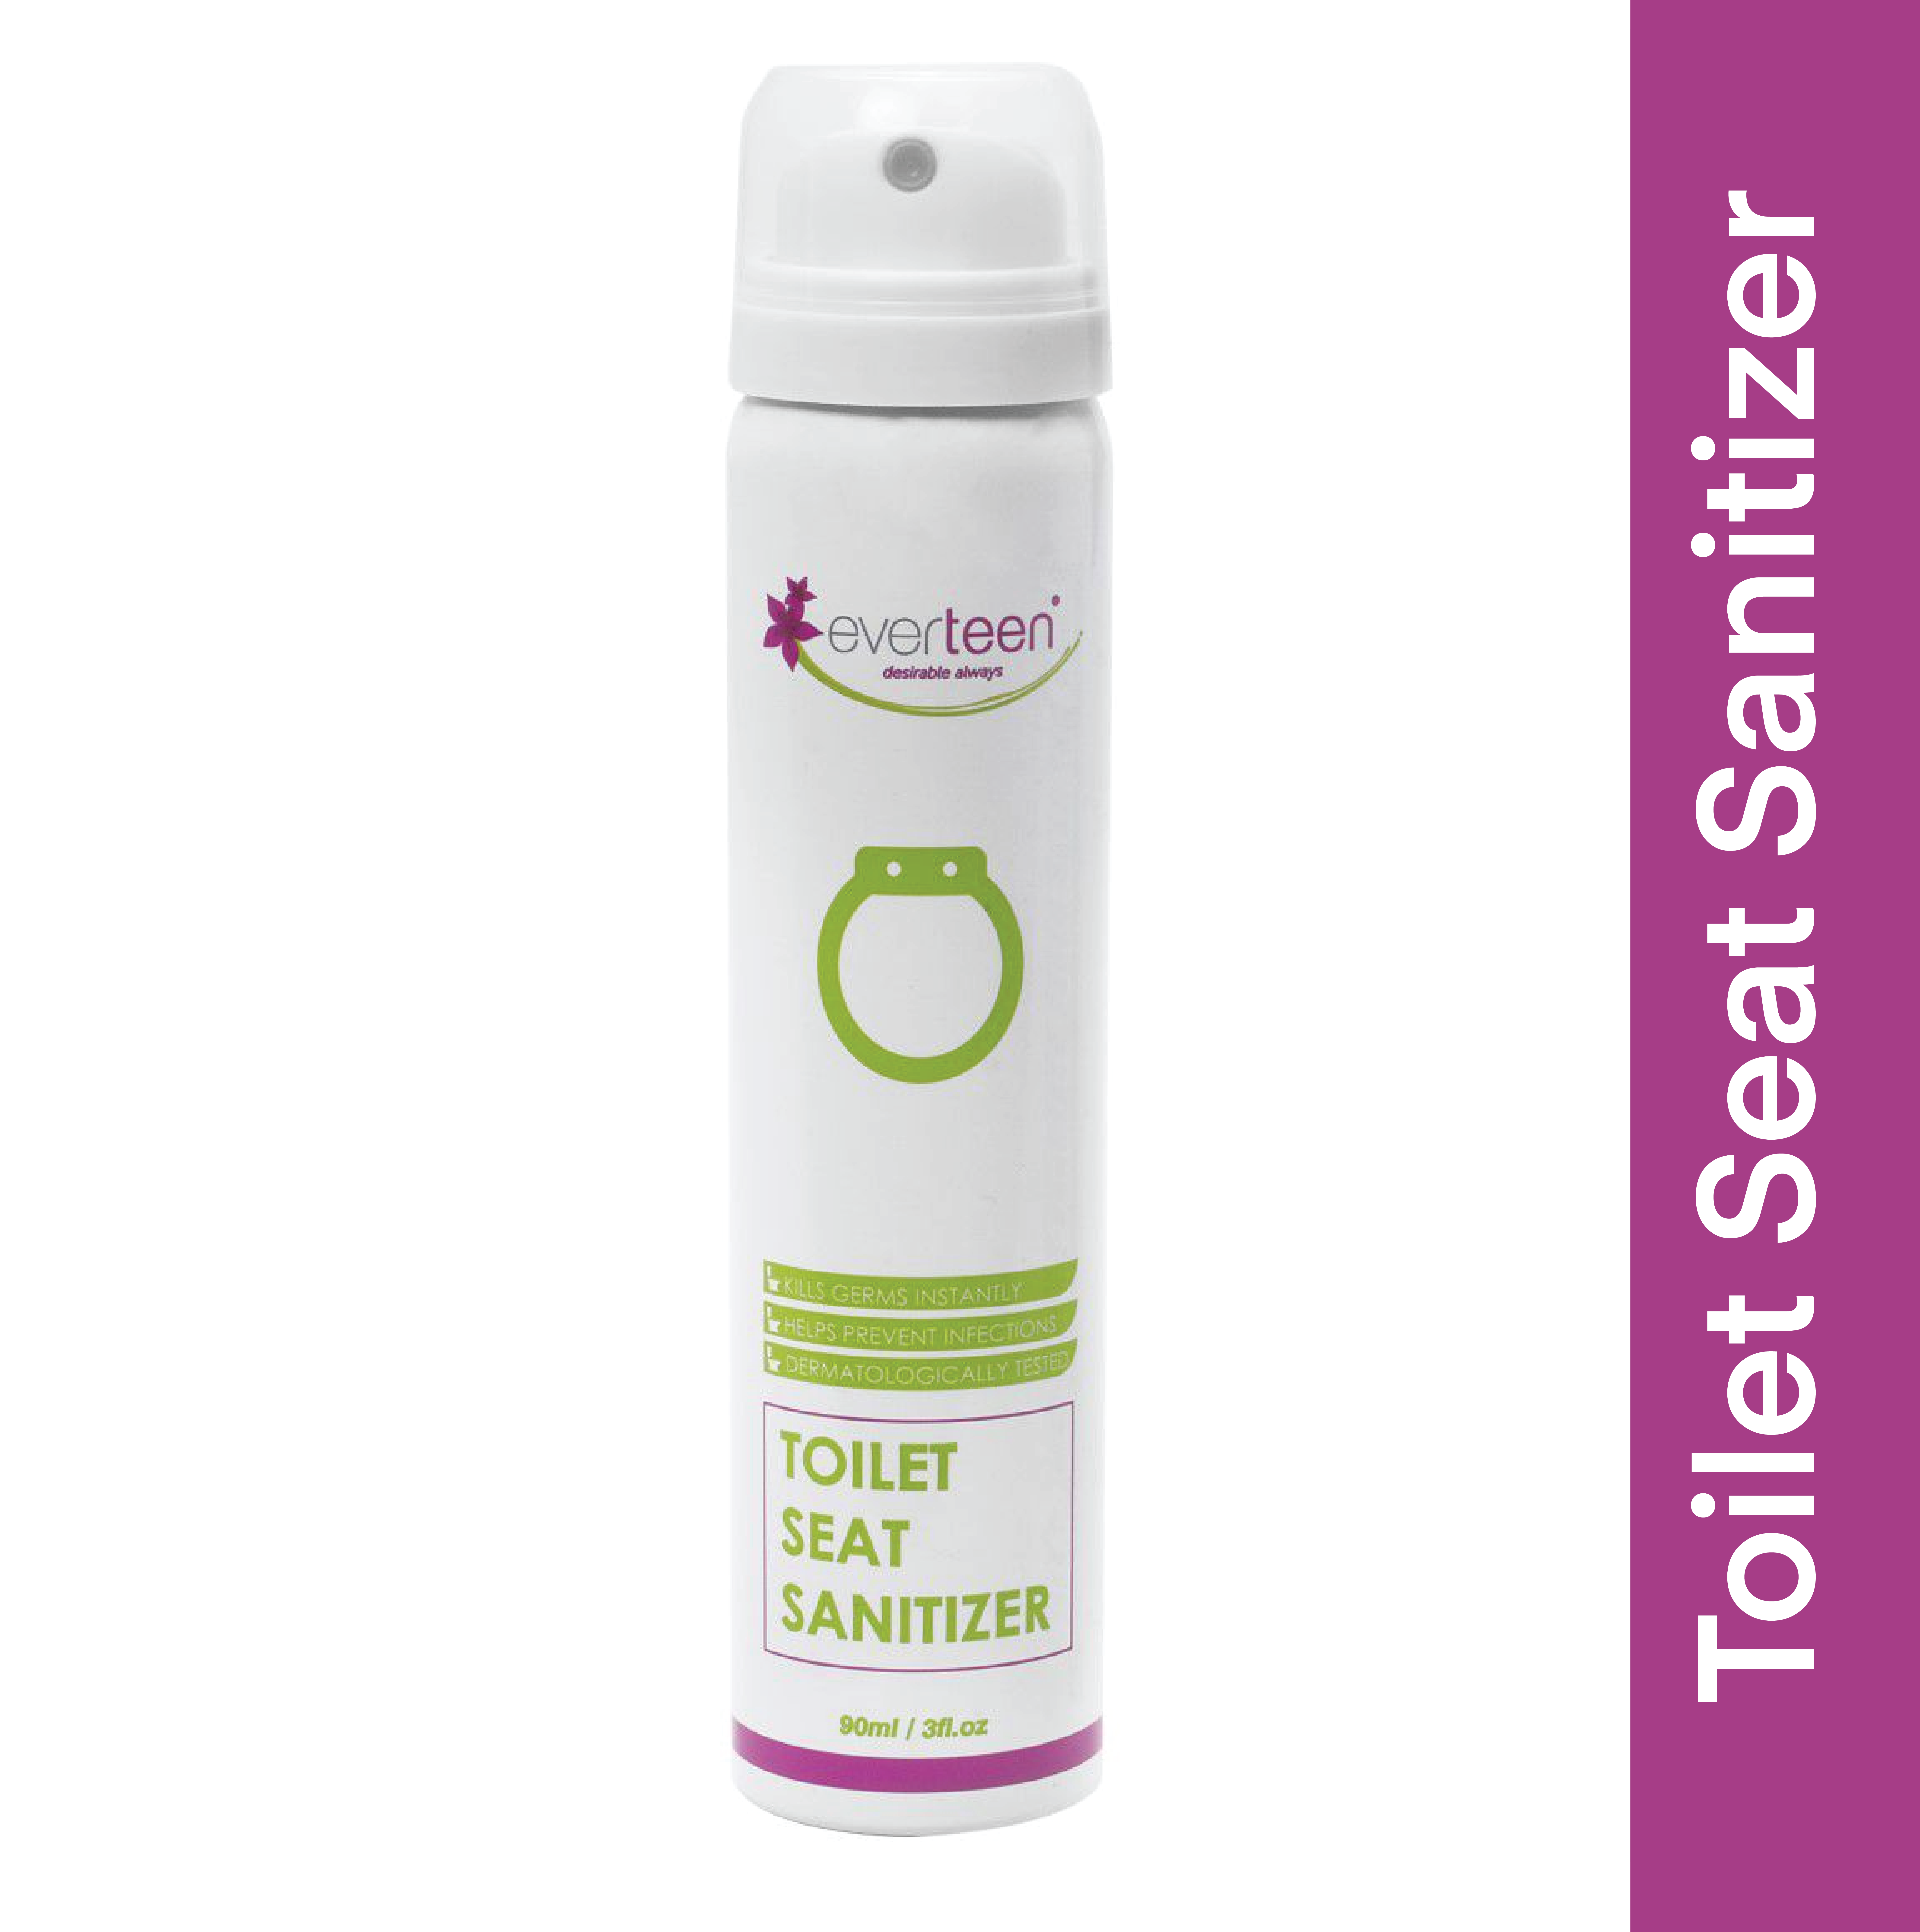 Everteen Instant Toilet Seat Sanitizer Toilet Cleaner Ready to Use Liquid Floral 90